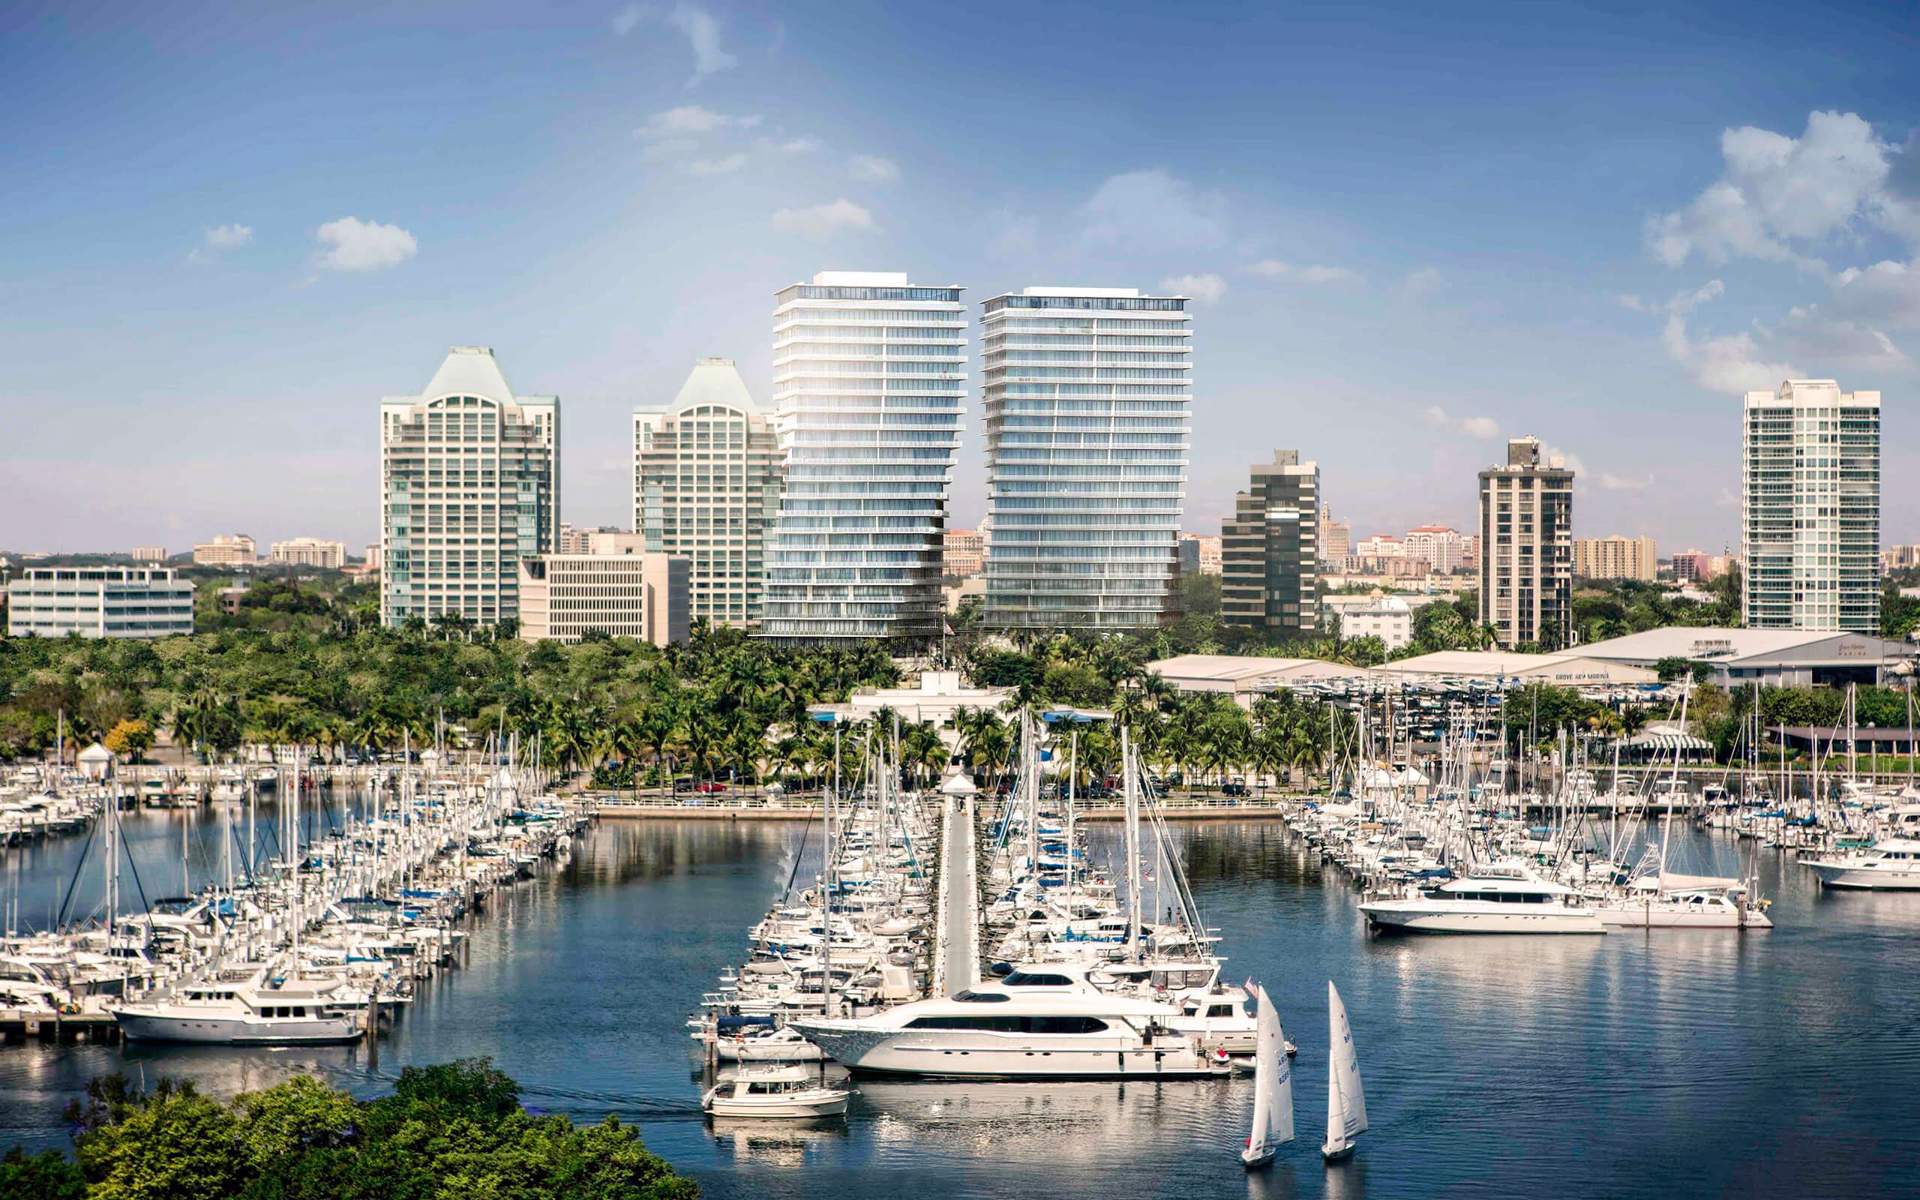 Grove at Grand Bay Miami: Architectural Elegance Meets Ecological Innovation